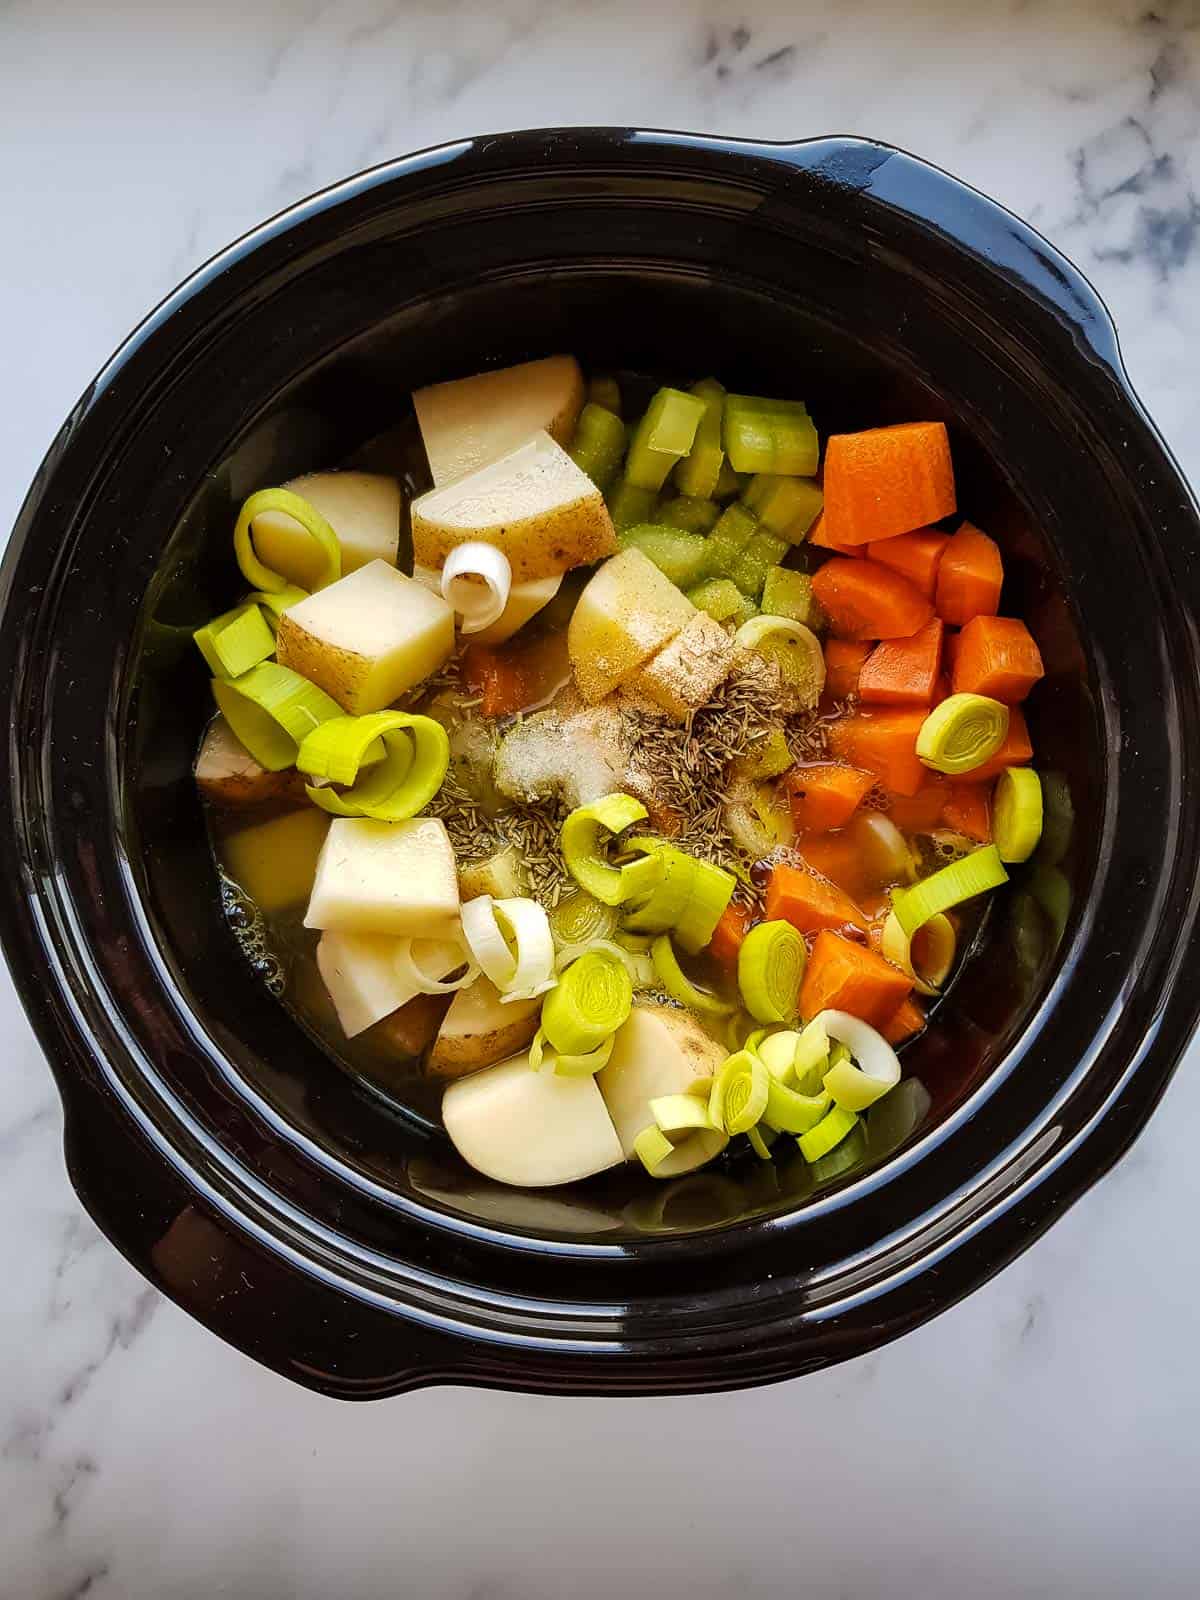 Stew ingredients in a slow cooker.